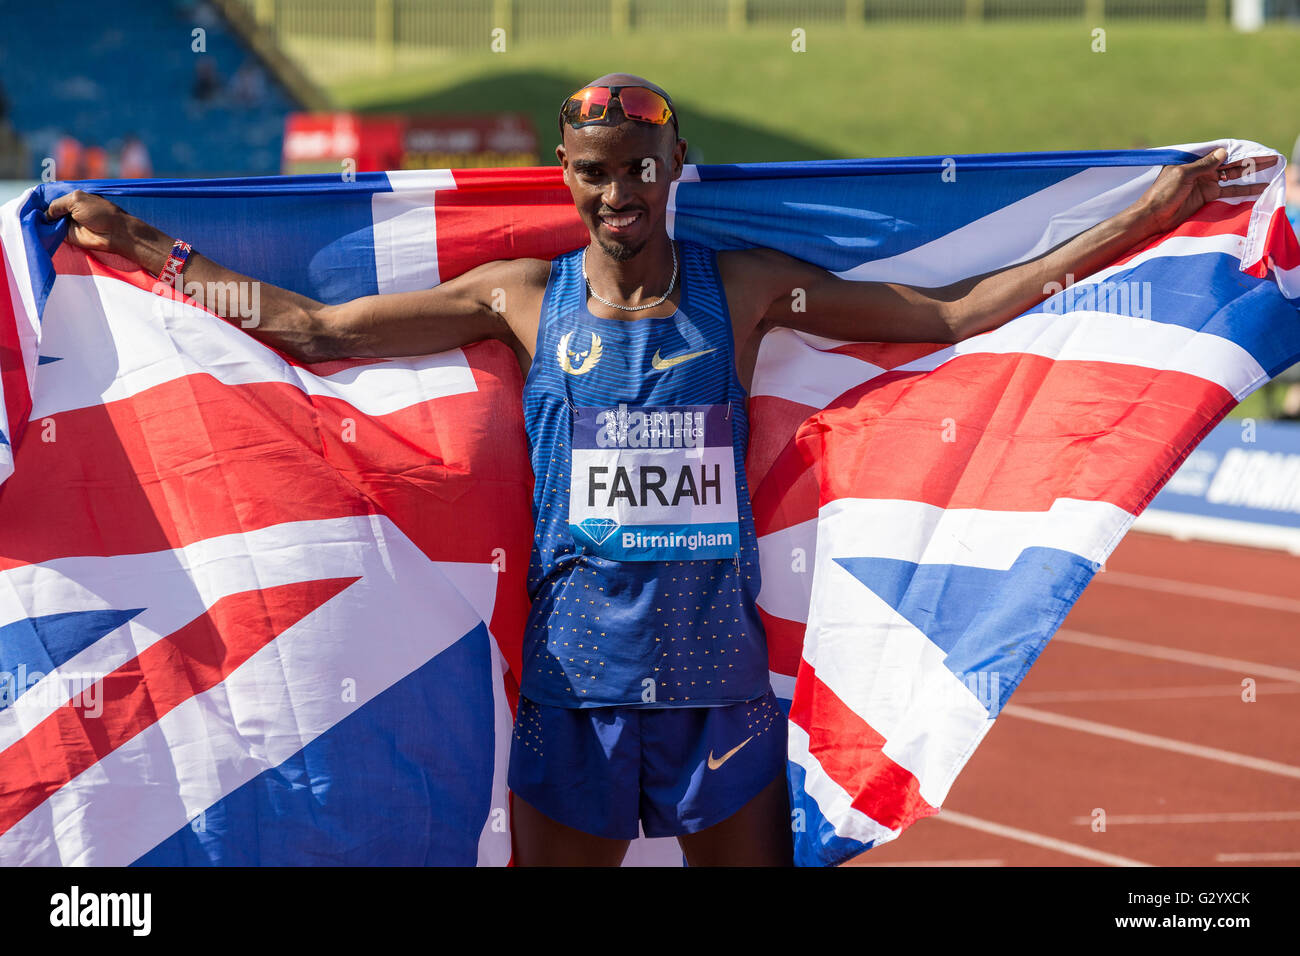 Mo Farah breaks a 34 year old record for the 3000m previously set at 7:32.79 by David Moorcroft in 1982. Farah beat the record with a time of 7:32.62 just 17 hundredths of a second faster. He dedicated his win to boxer Muhammad Ali who died just two days prior. Stock Photo